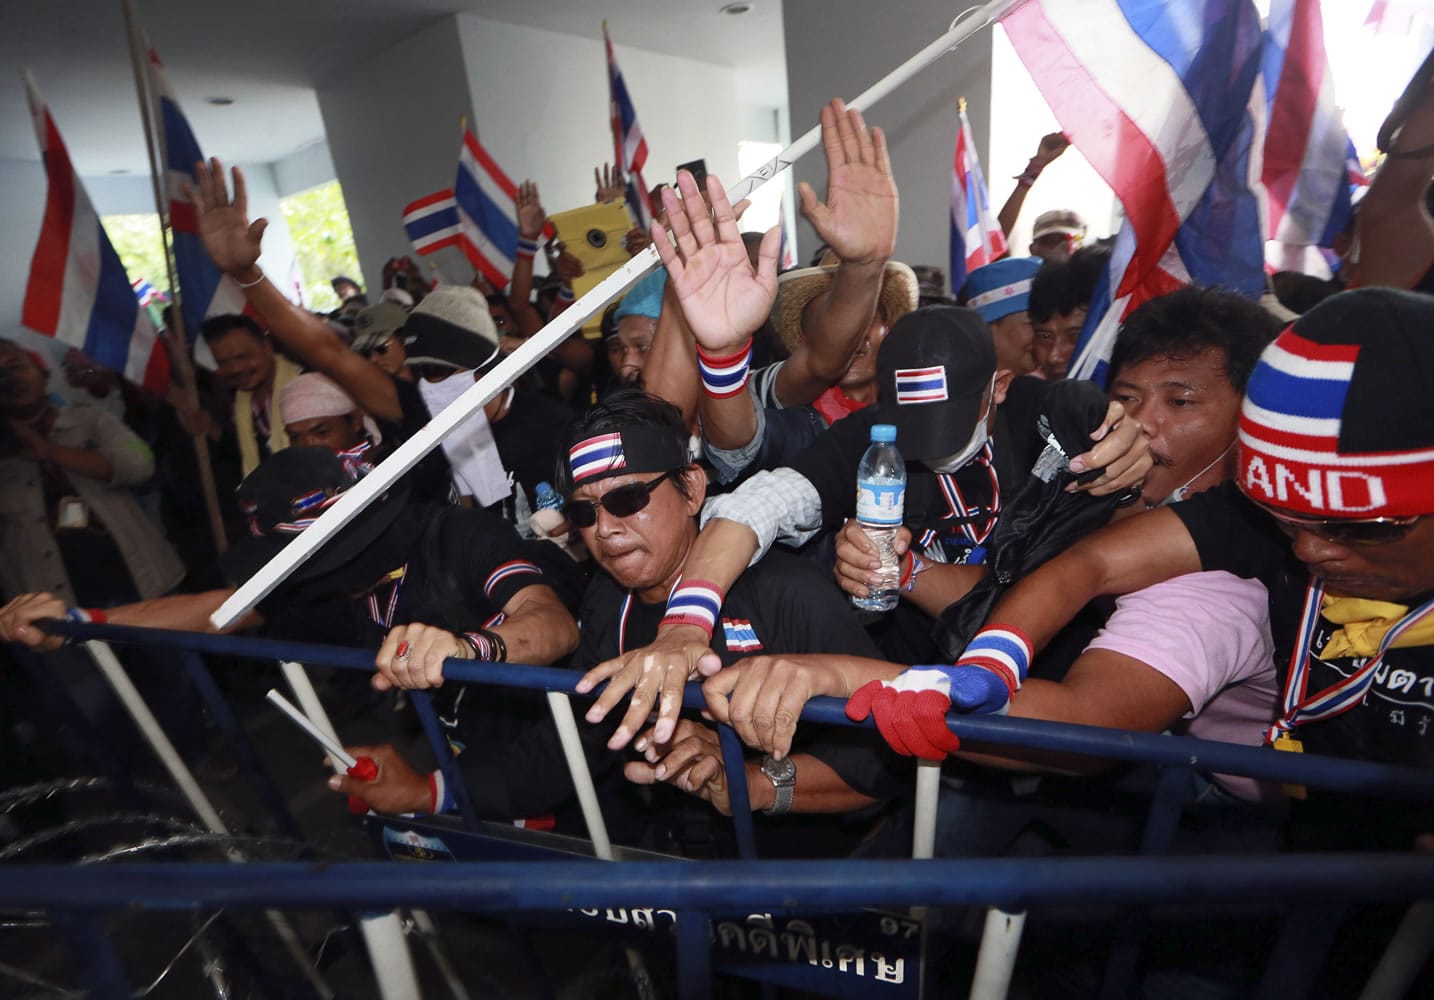 Anti-government protesters try to remove a police barricade during a rally in front of the Department of Special Investigation on Saturday in Bangkok, Thailand.